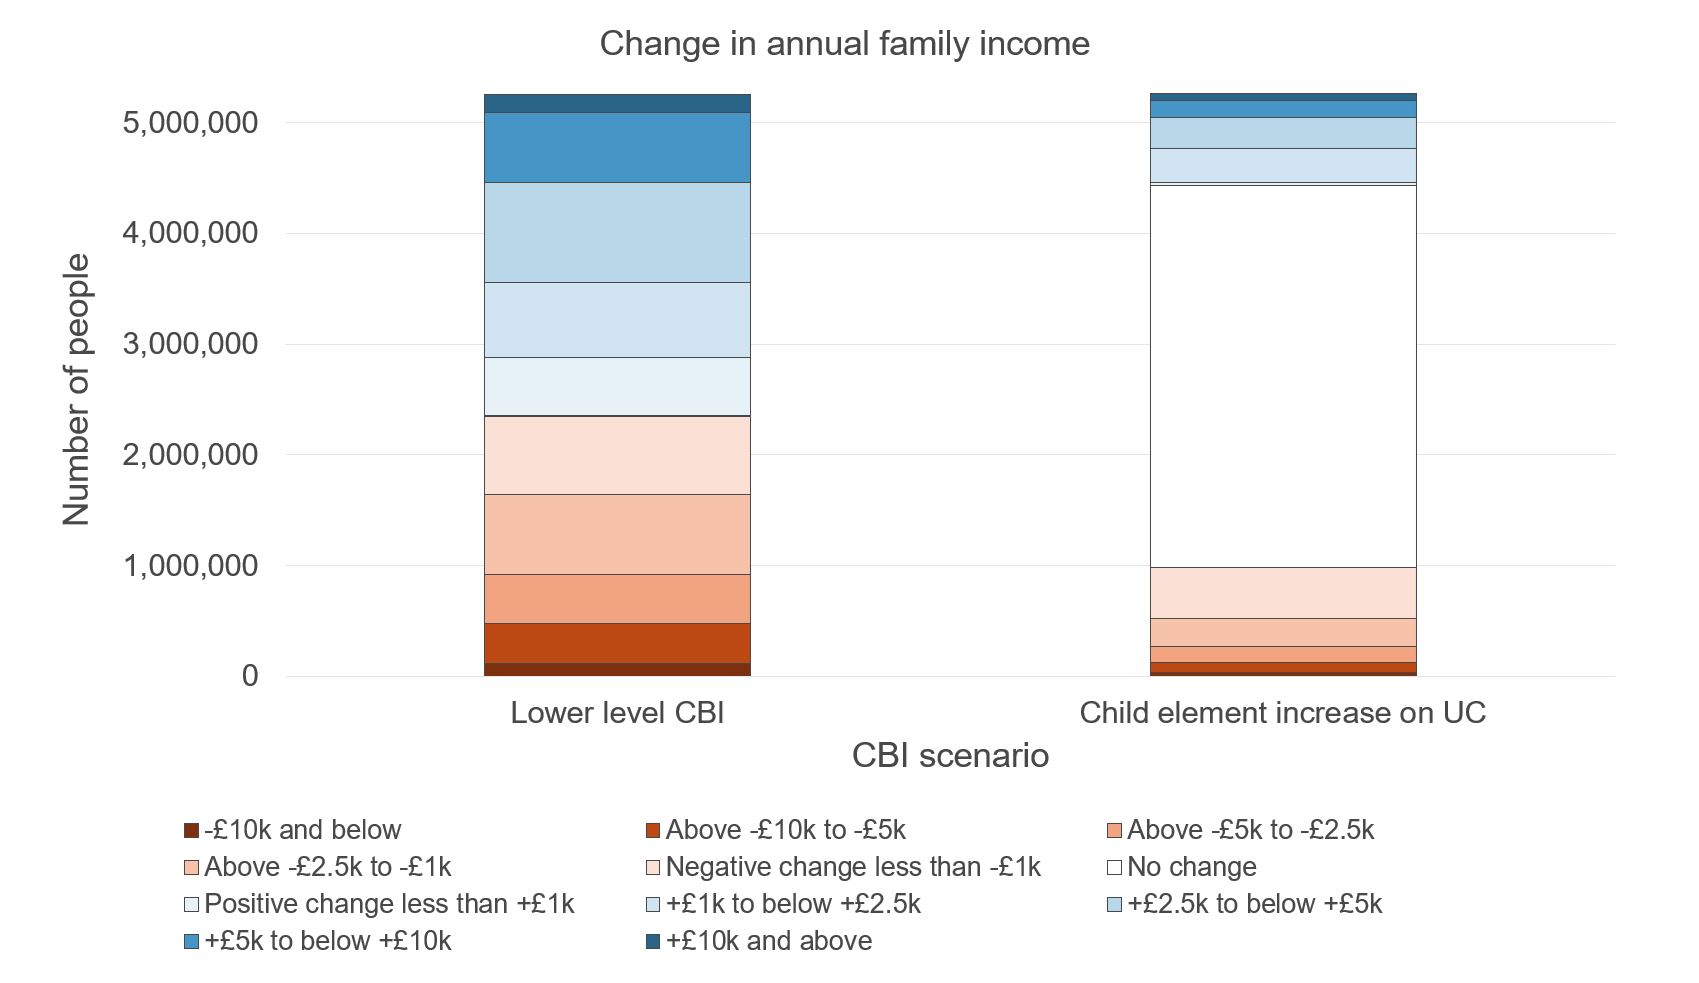 Figure showing change in annual family income